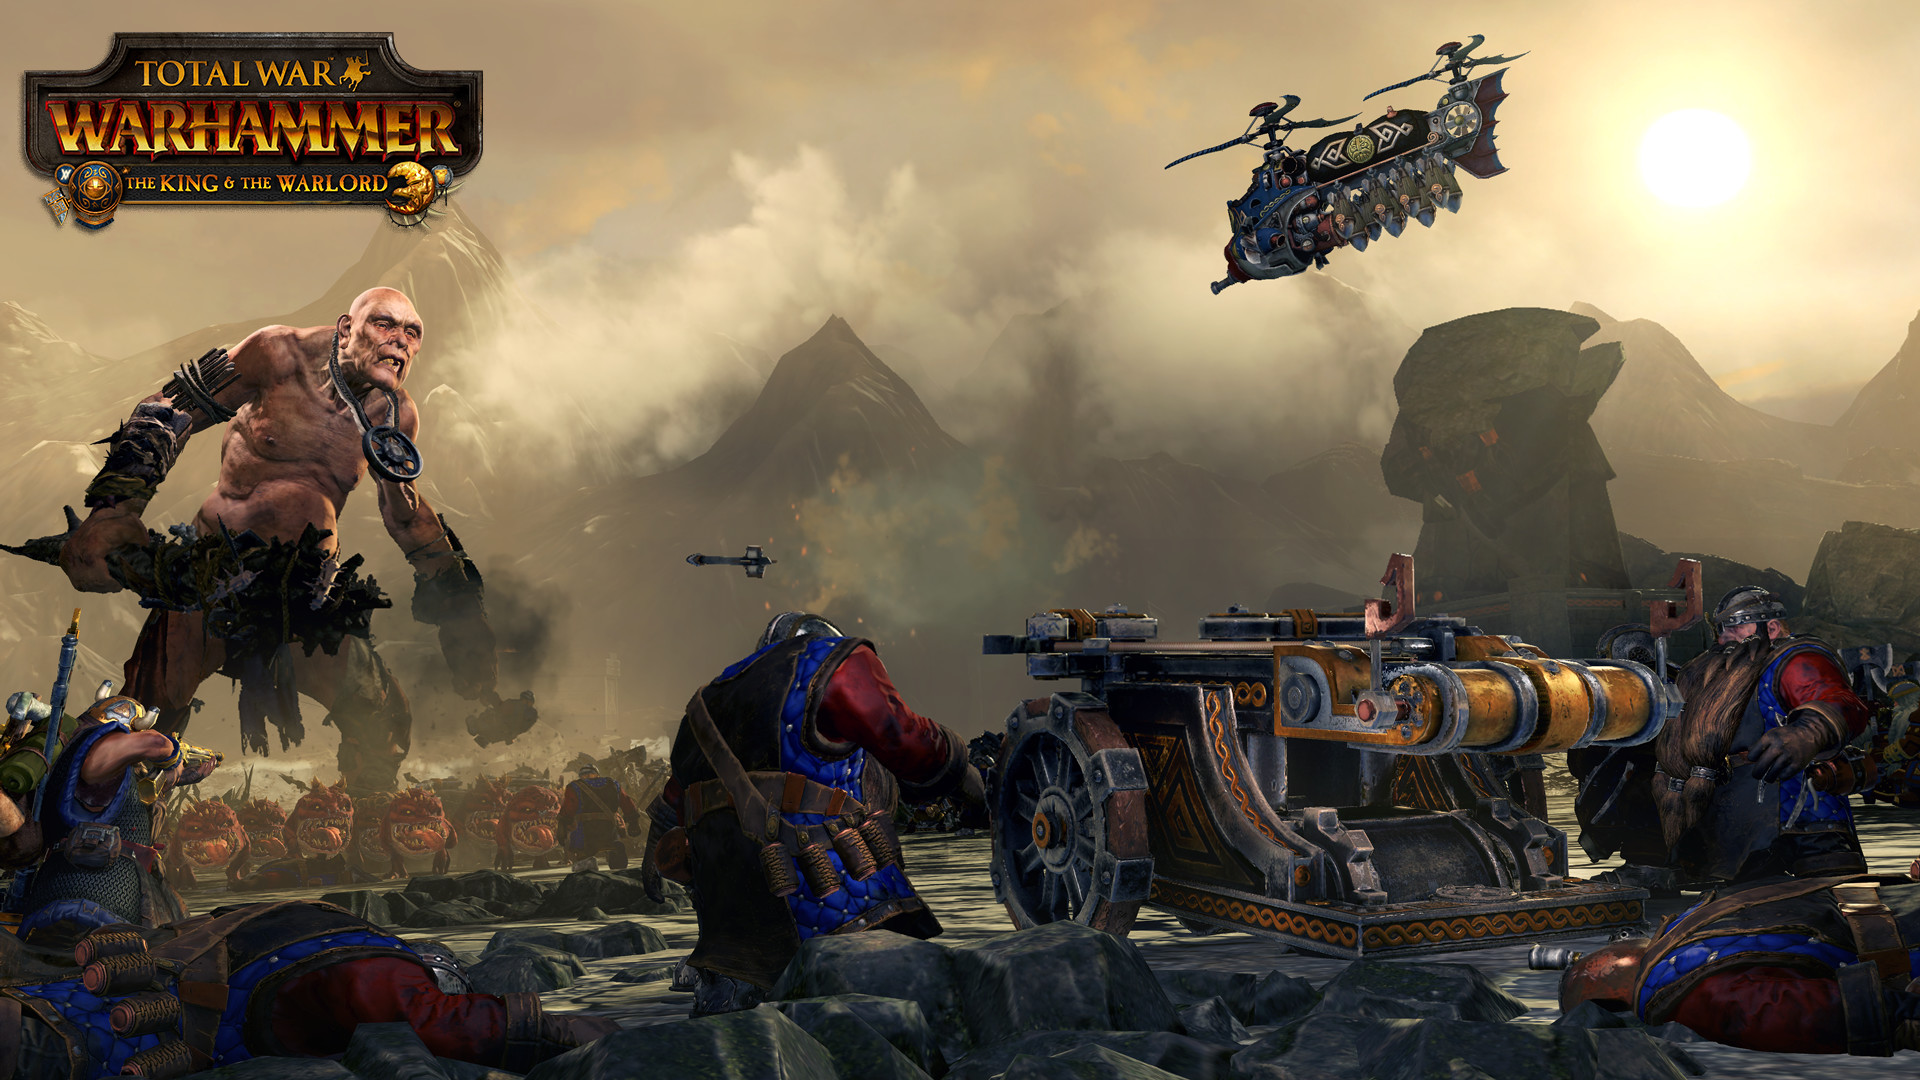 Total War: WARHAMMER - The King and the Warlord on Steam